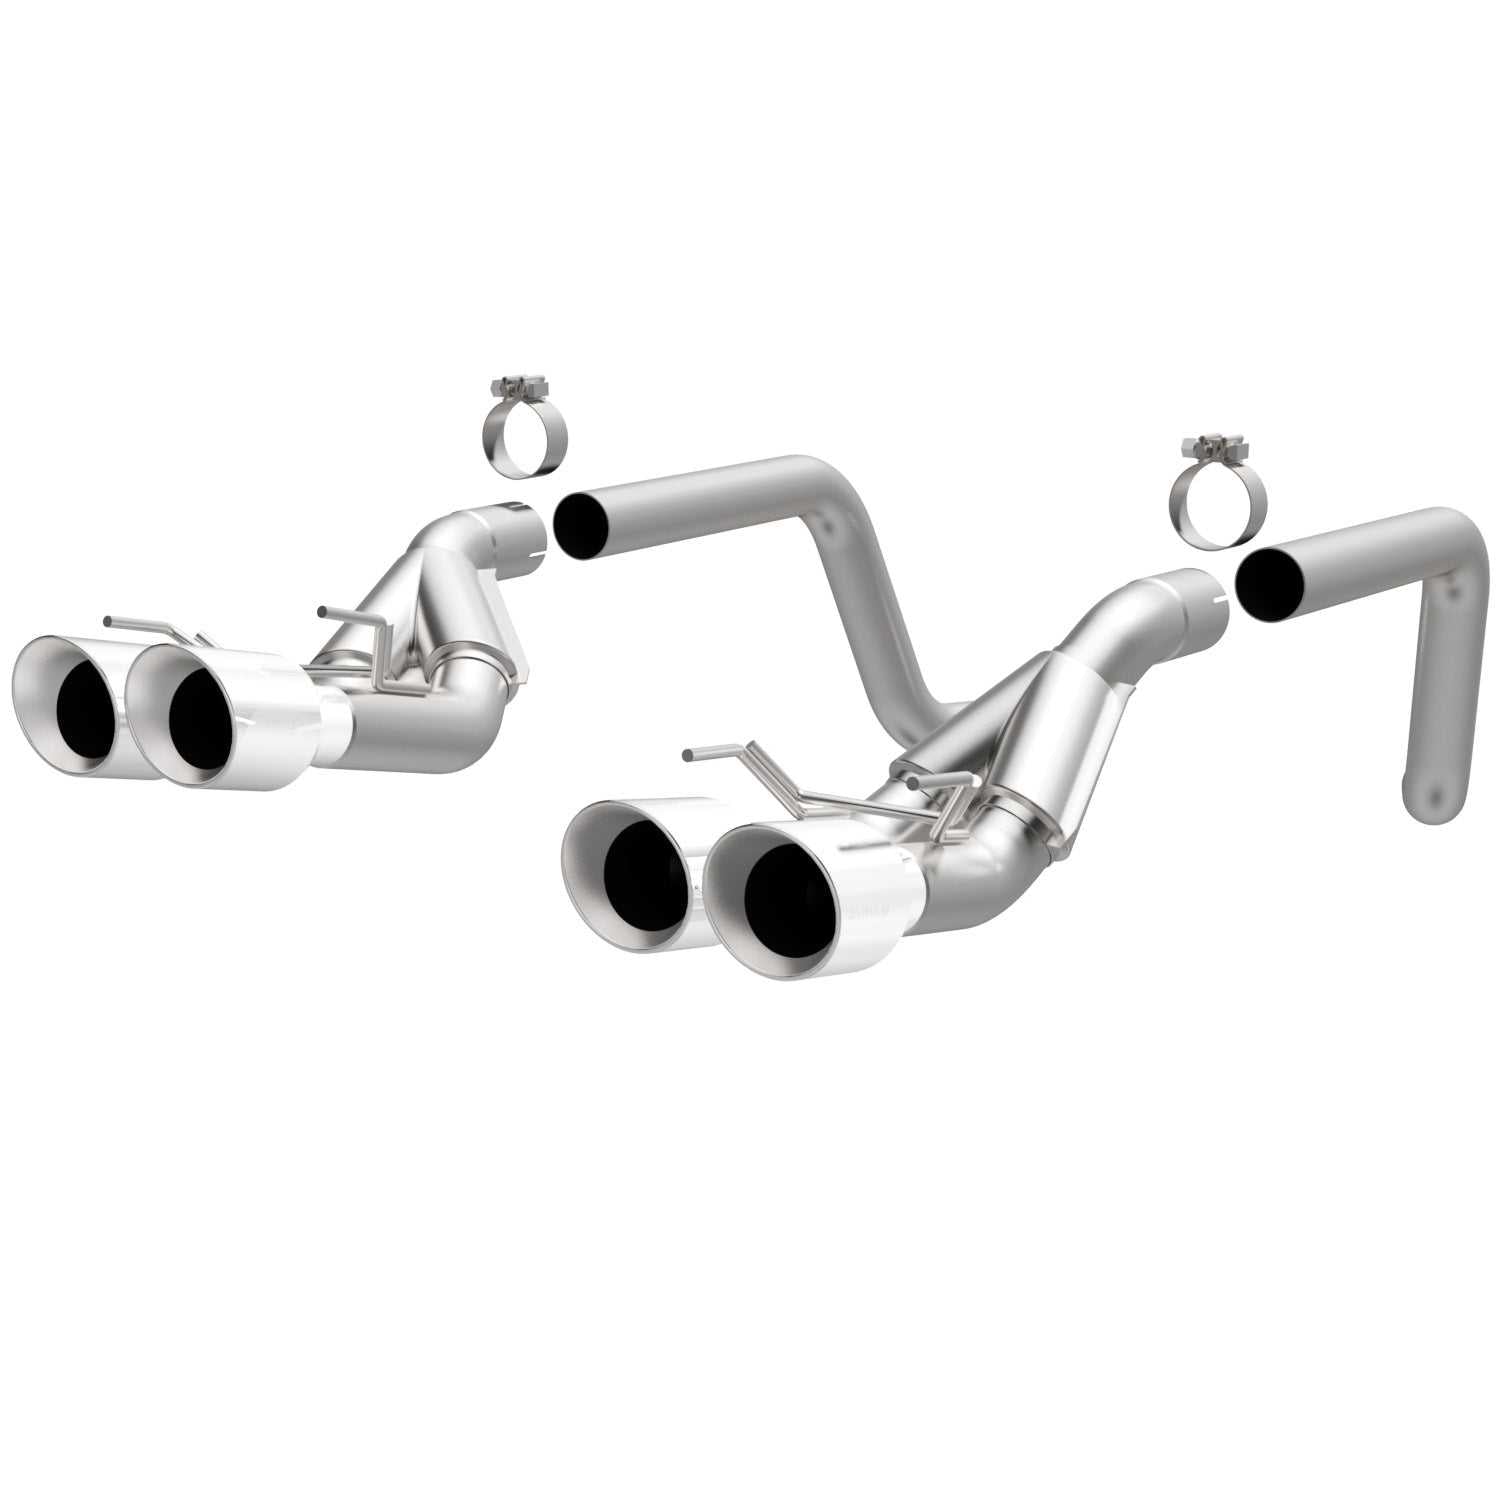 Magnaflow, 15283 Magnaflow Performance Exhaust System Kit Stainless Steel